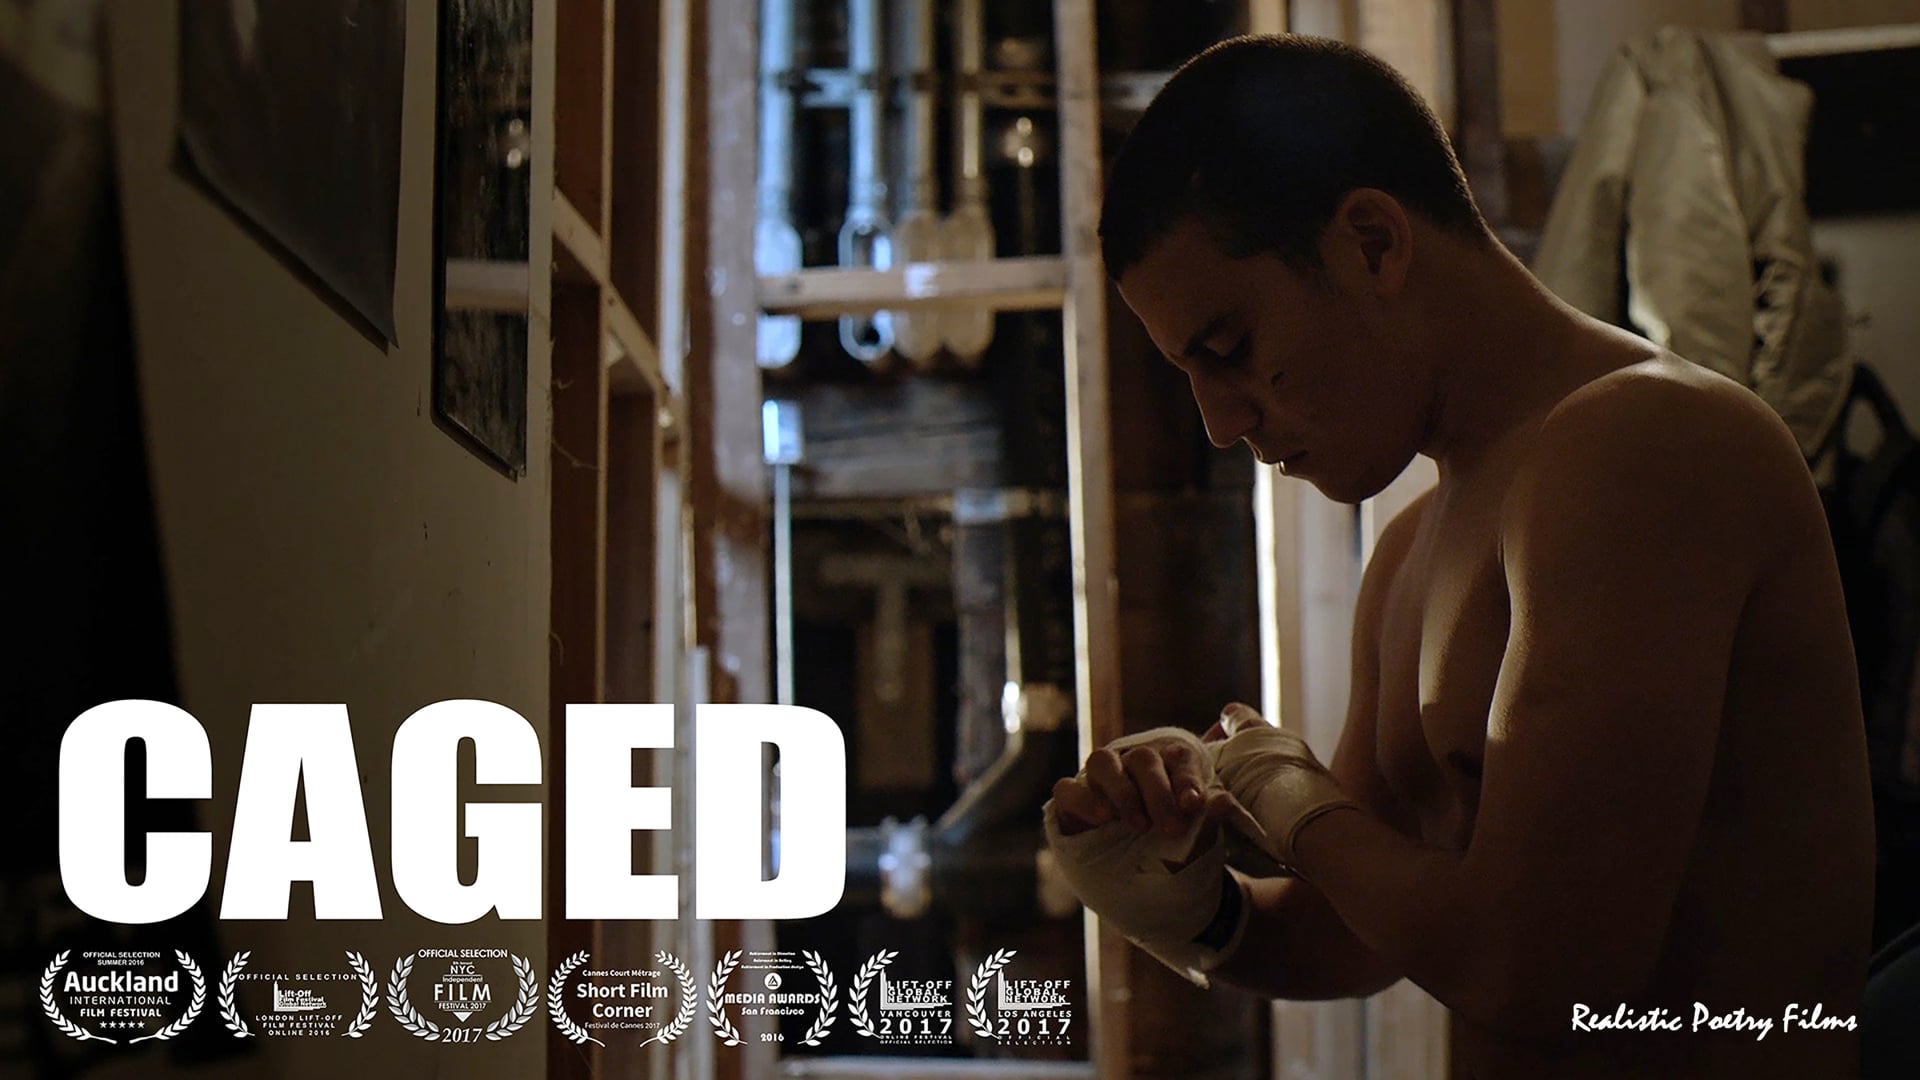 CAGED Theatrical Trailer